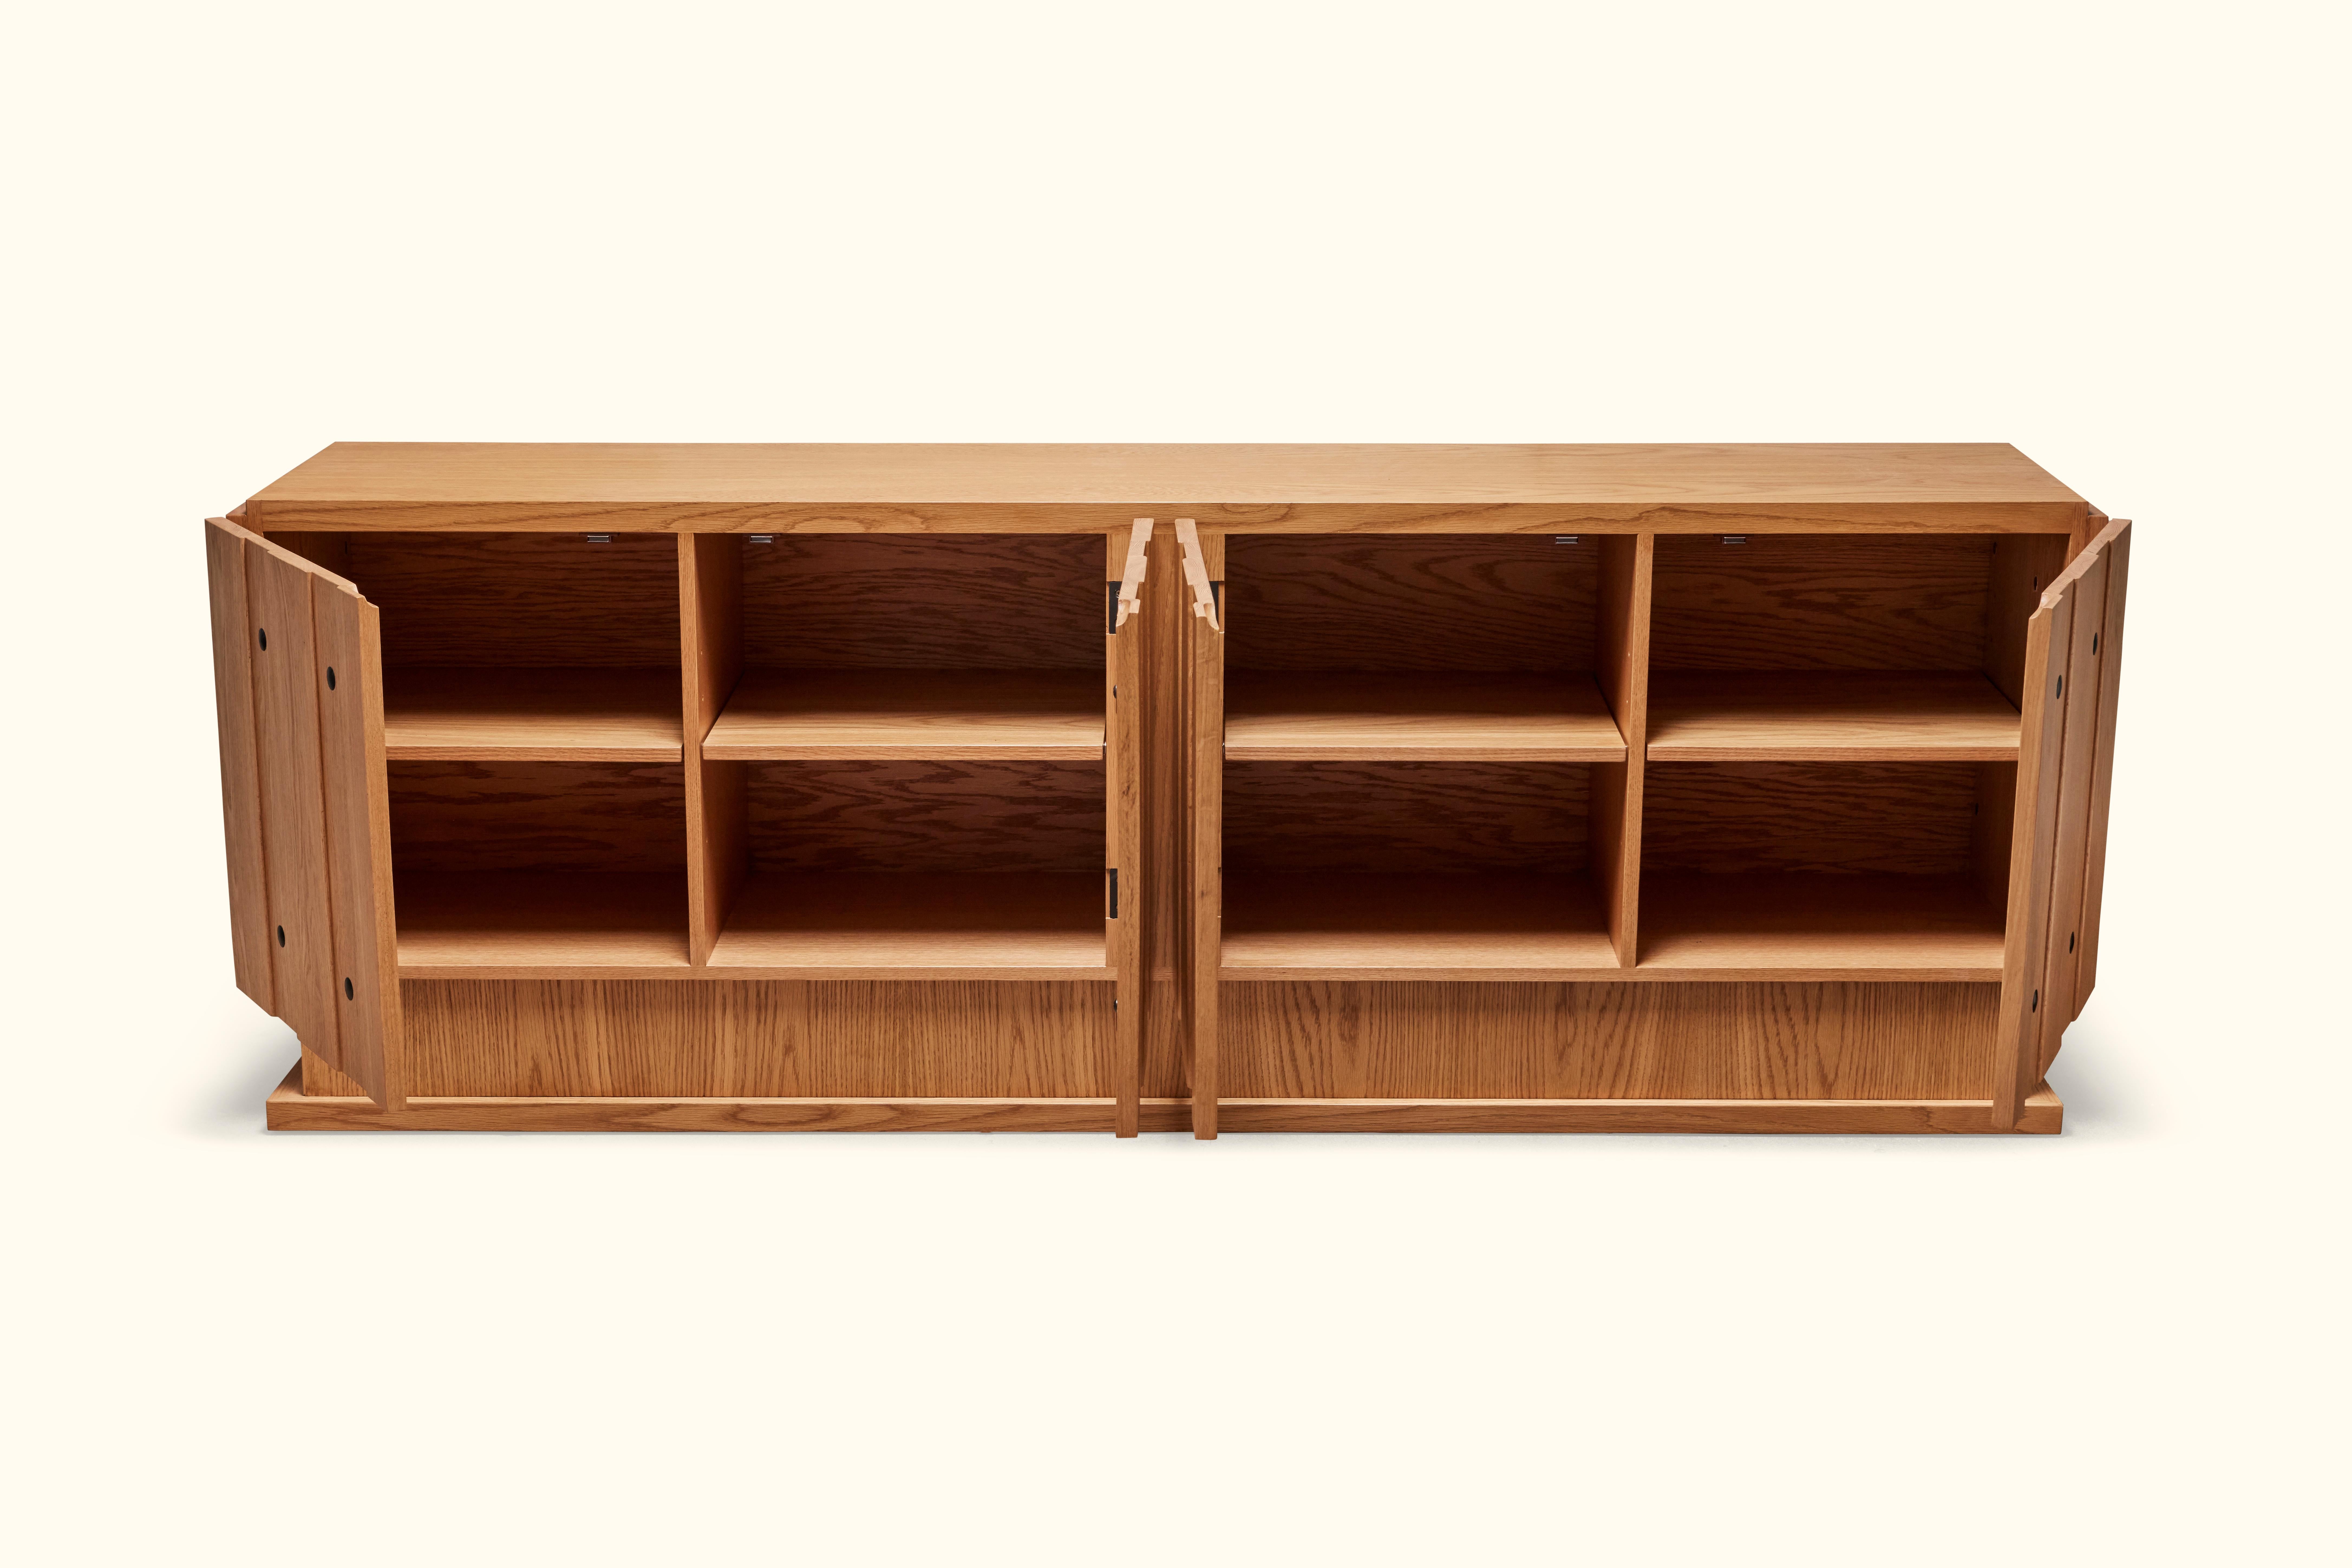 The 4-door Ojai cabinet features board and batten doors with iron details and adjustable shelves. Available in two sizes and in American walnut and white oak. Shown here in Oiled Oak. 

The Lawson-Fenning Collection is designed and handmade in Los